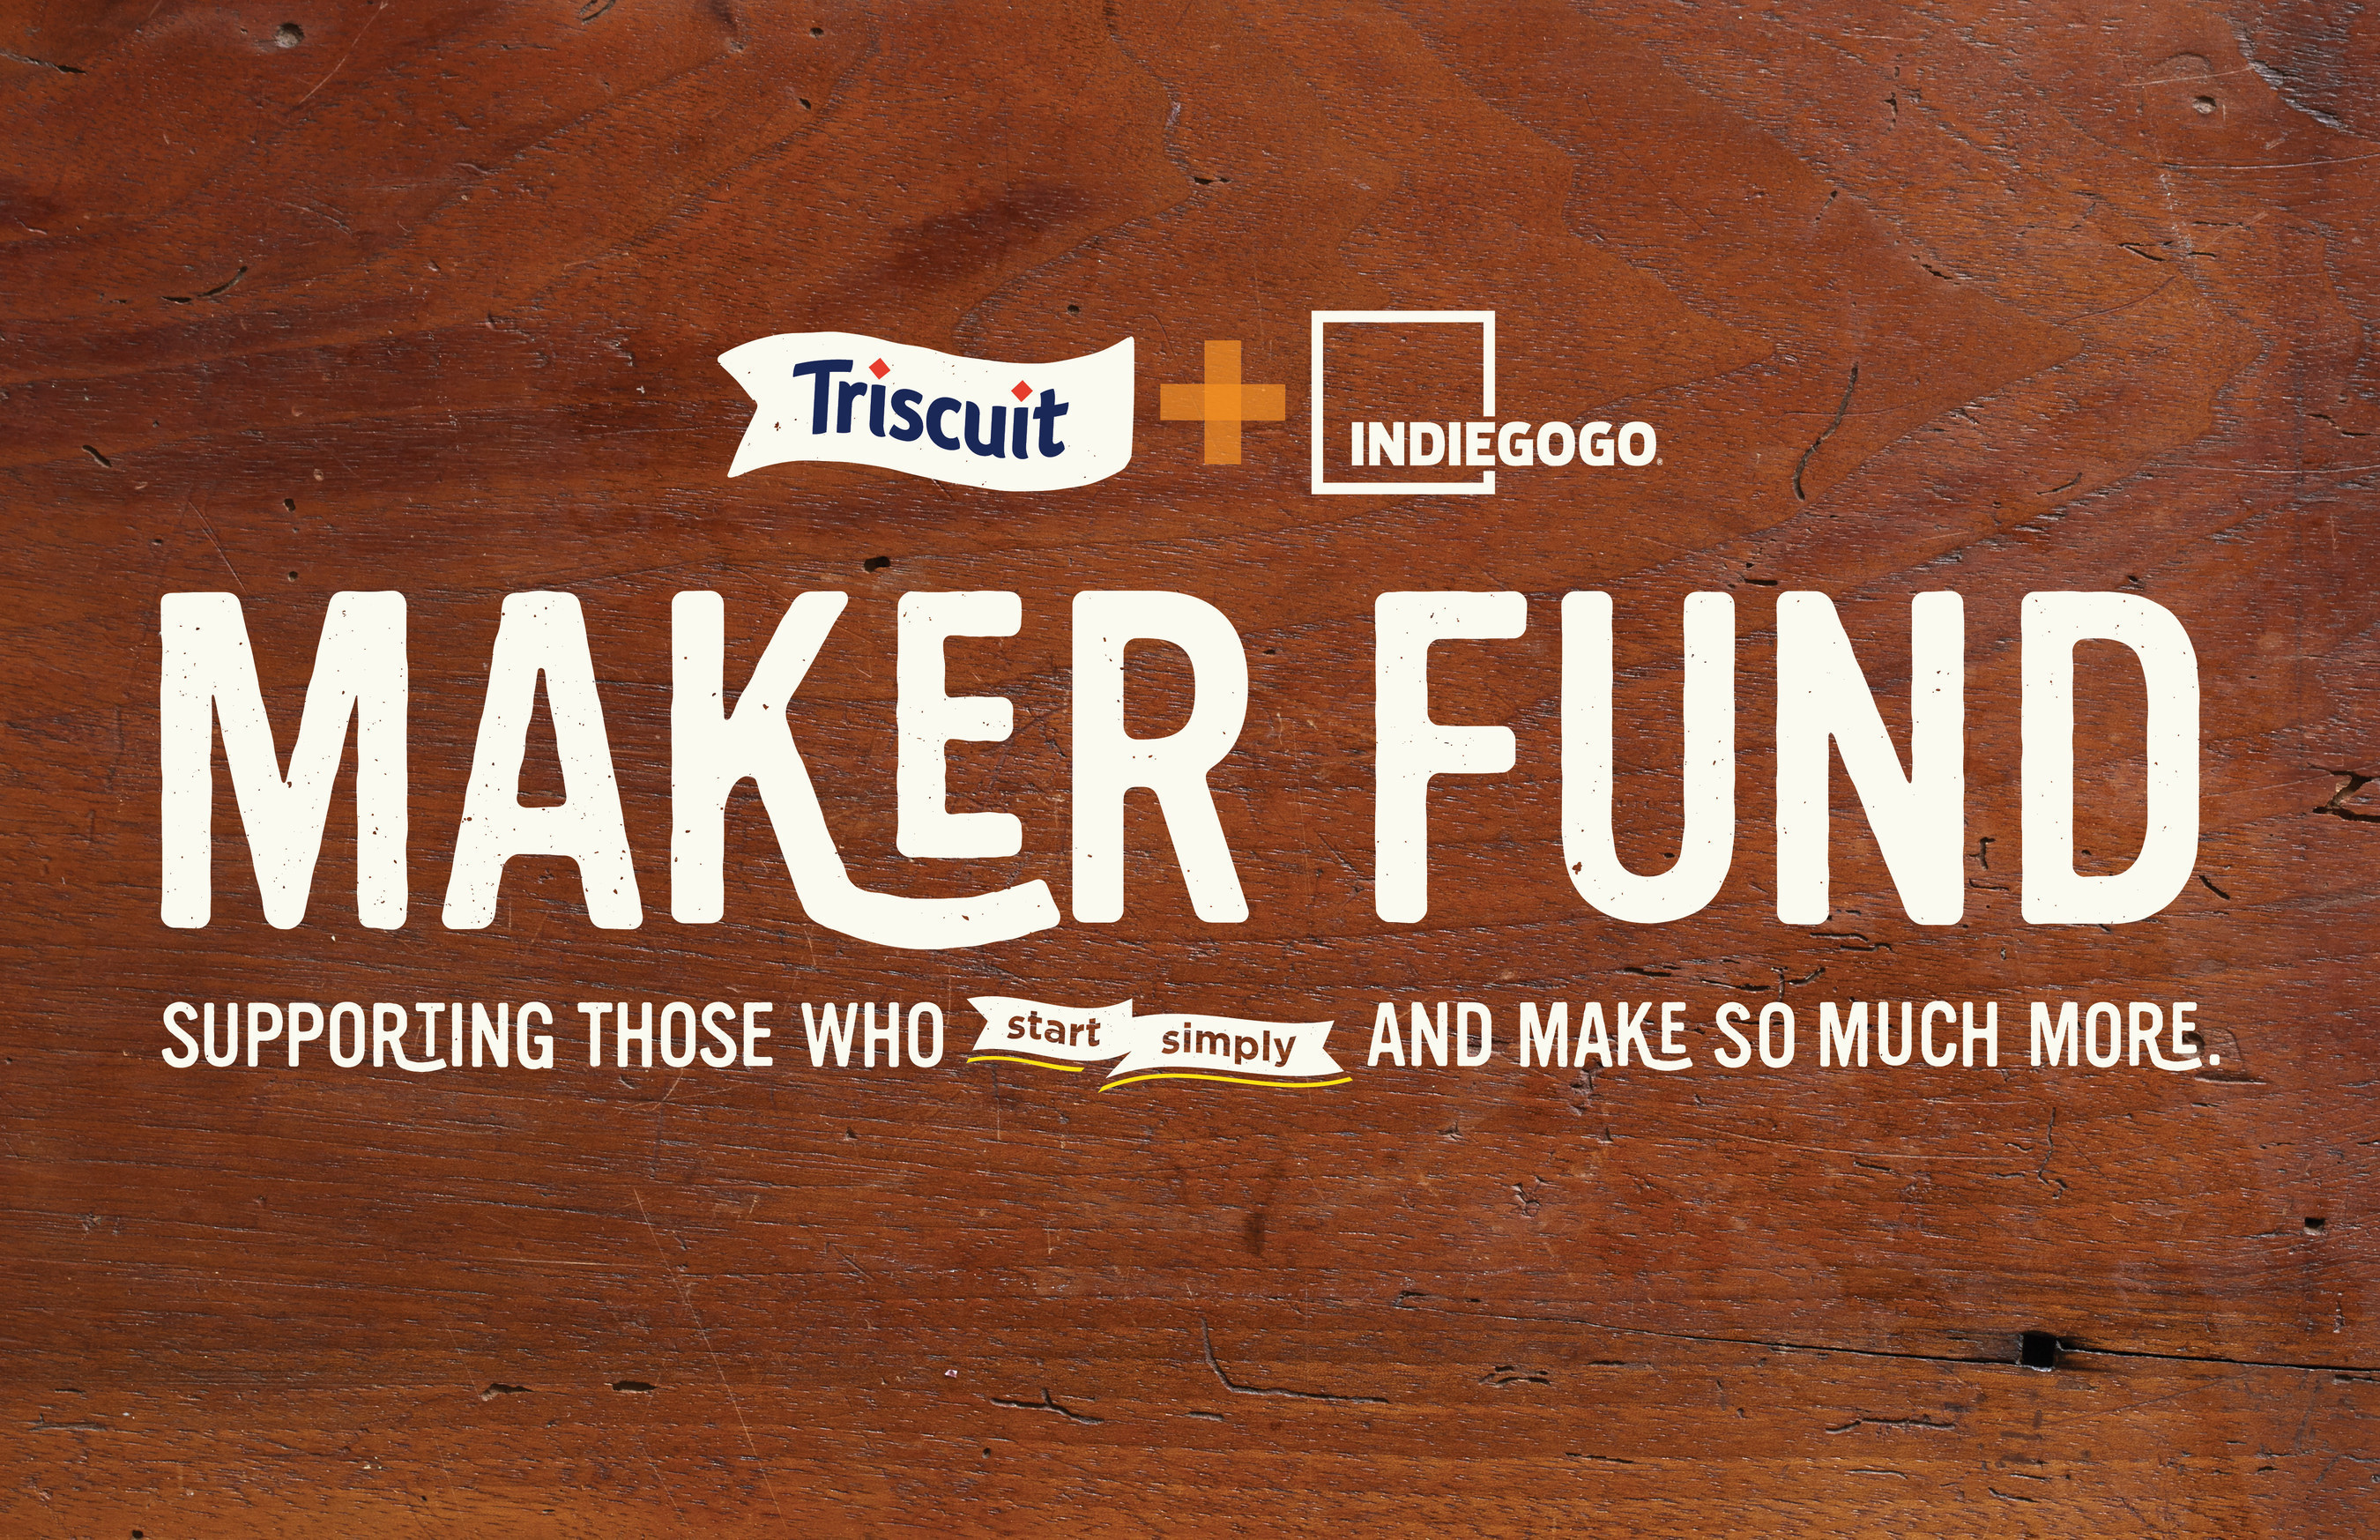 Triscuit Donating $250,000 to Food Maker Projects on Indiegogo